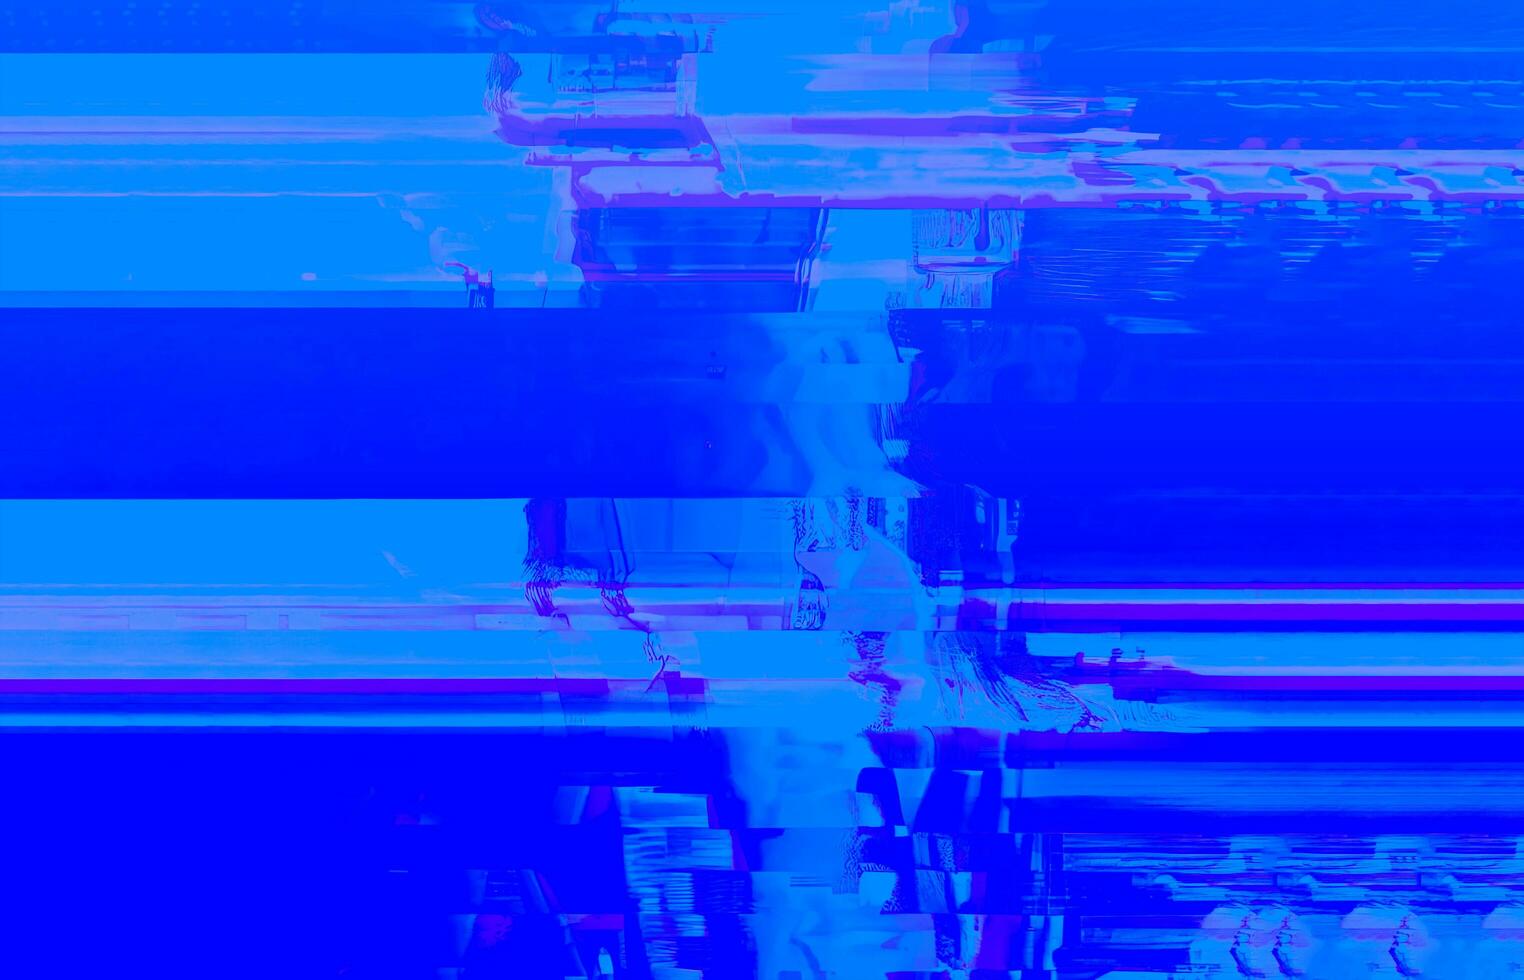 Retro VHS Glitch Abstract Interference and Noise Background with Distorted Patterns and Cyberpunk Aesthetics photo